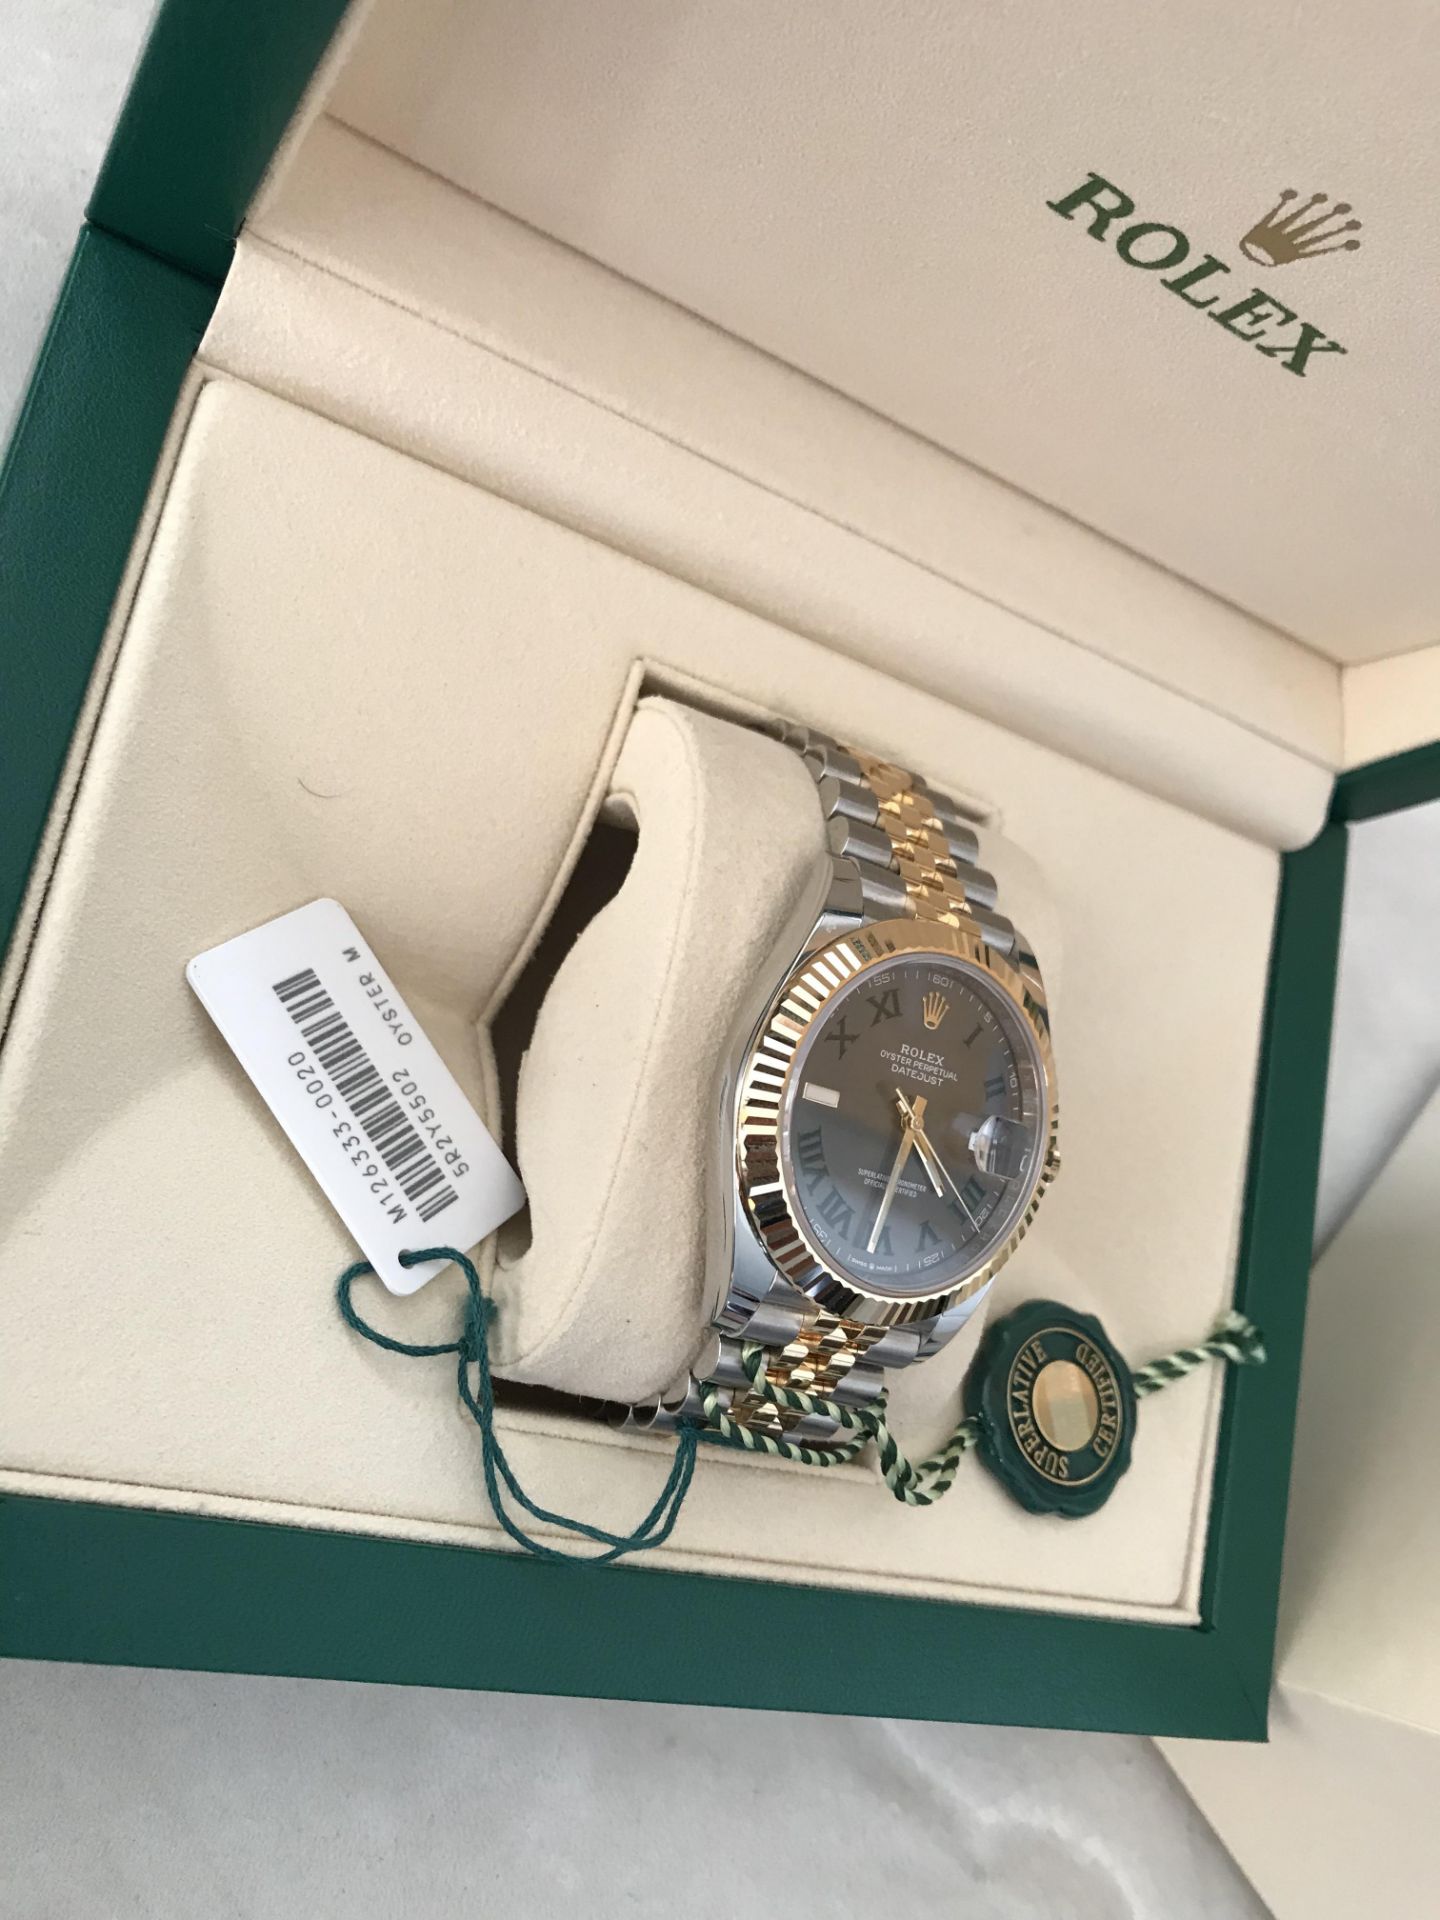 2019 ROLEX GOLD JUBILEE BIMETAL WIMBLEDON DATE JUST 41 OYSTER 41 MM OYSTERSTEEL AND YELLOW GOLD - Image 4 of 12